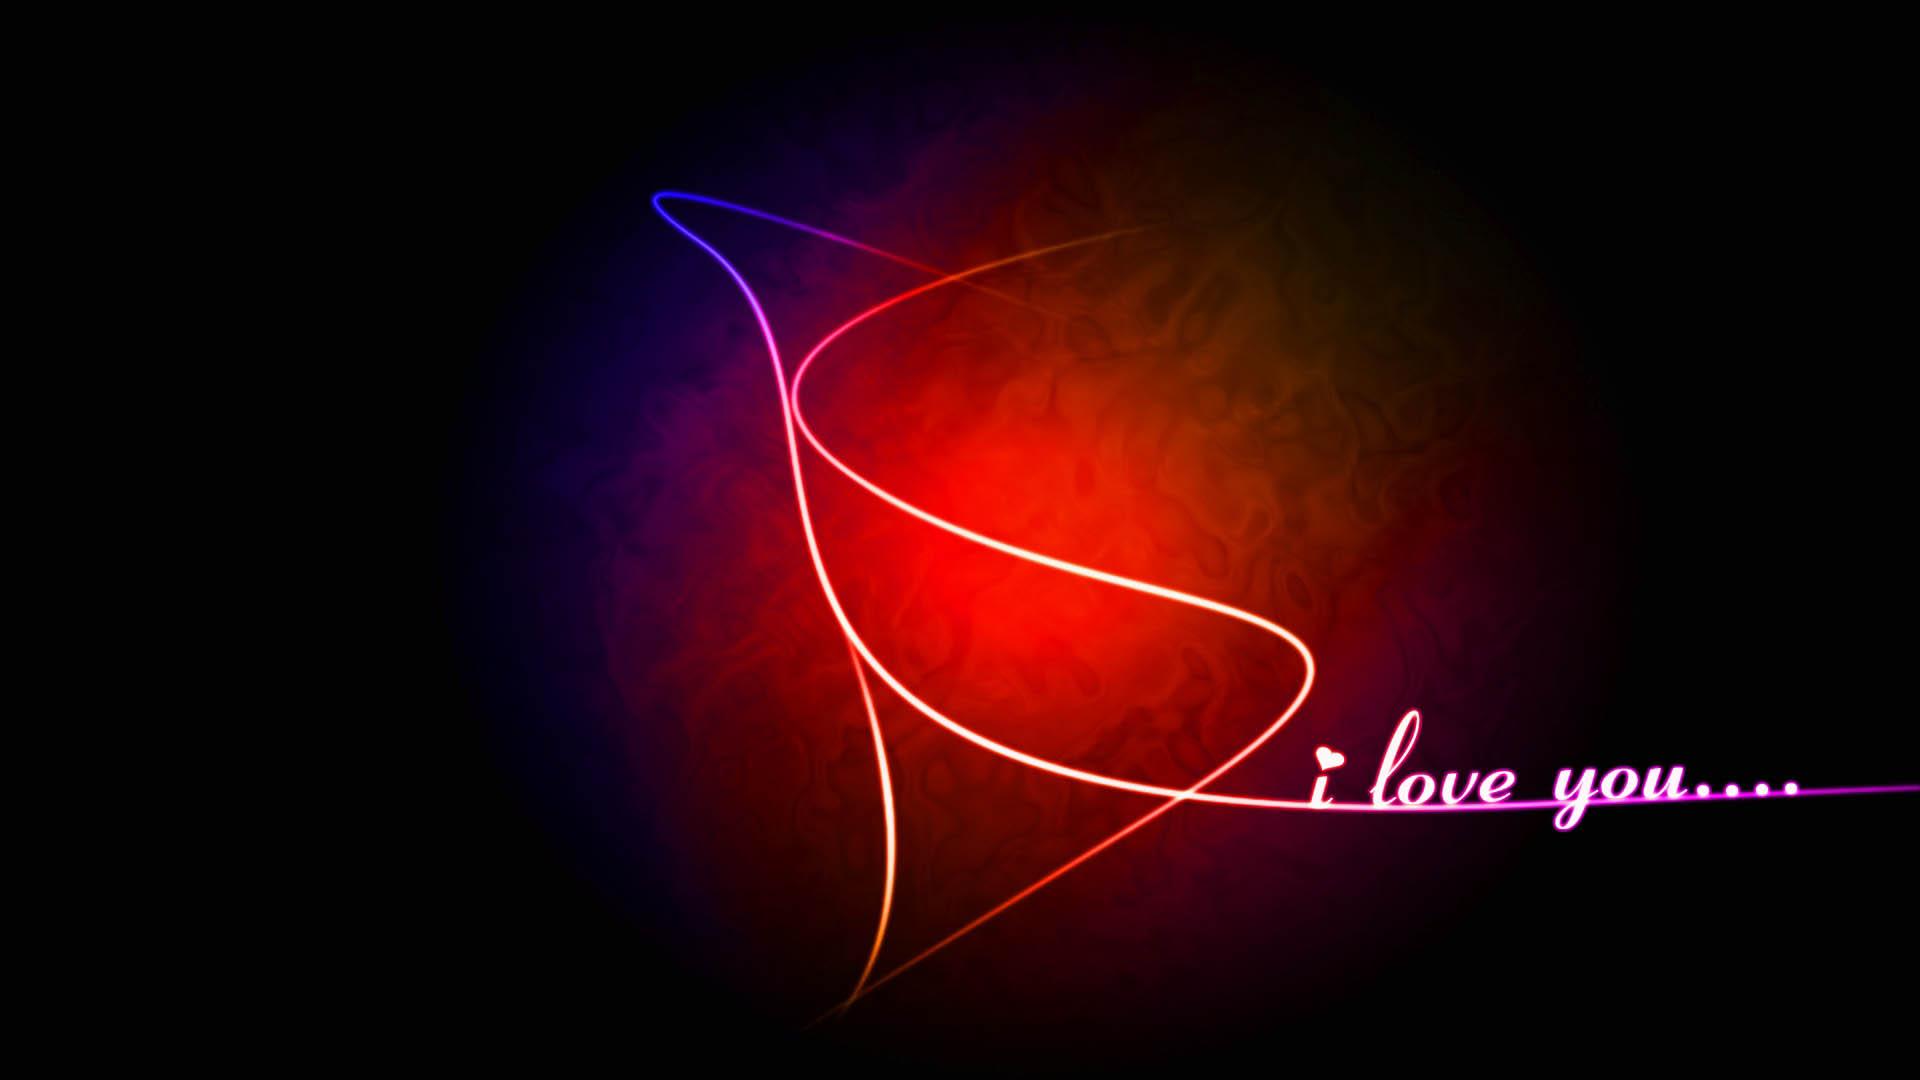 Love You Backgrounds 10227 Hd Wallpapers in Love   Imagescicom 1920x1080